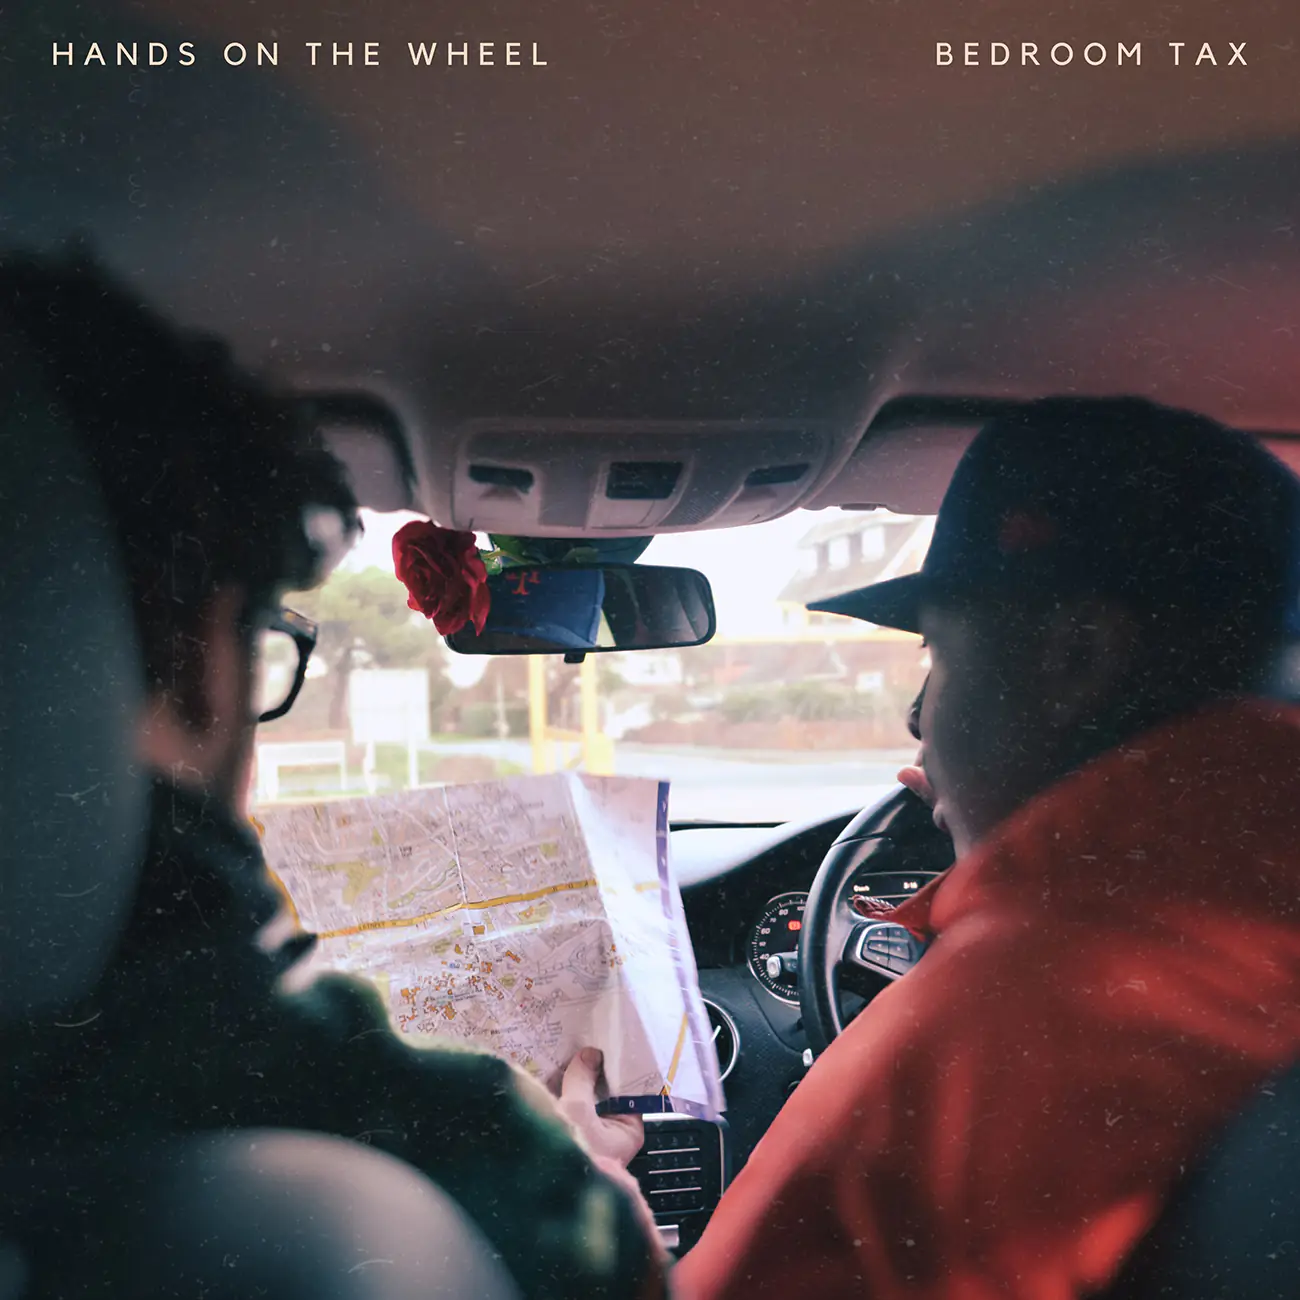 Bedroom Tax’s Latest Single ‘Hands on the Wheel’ Showcases Love on the Brink in Rap/Indie Infused Anthem